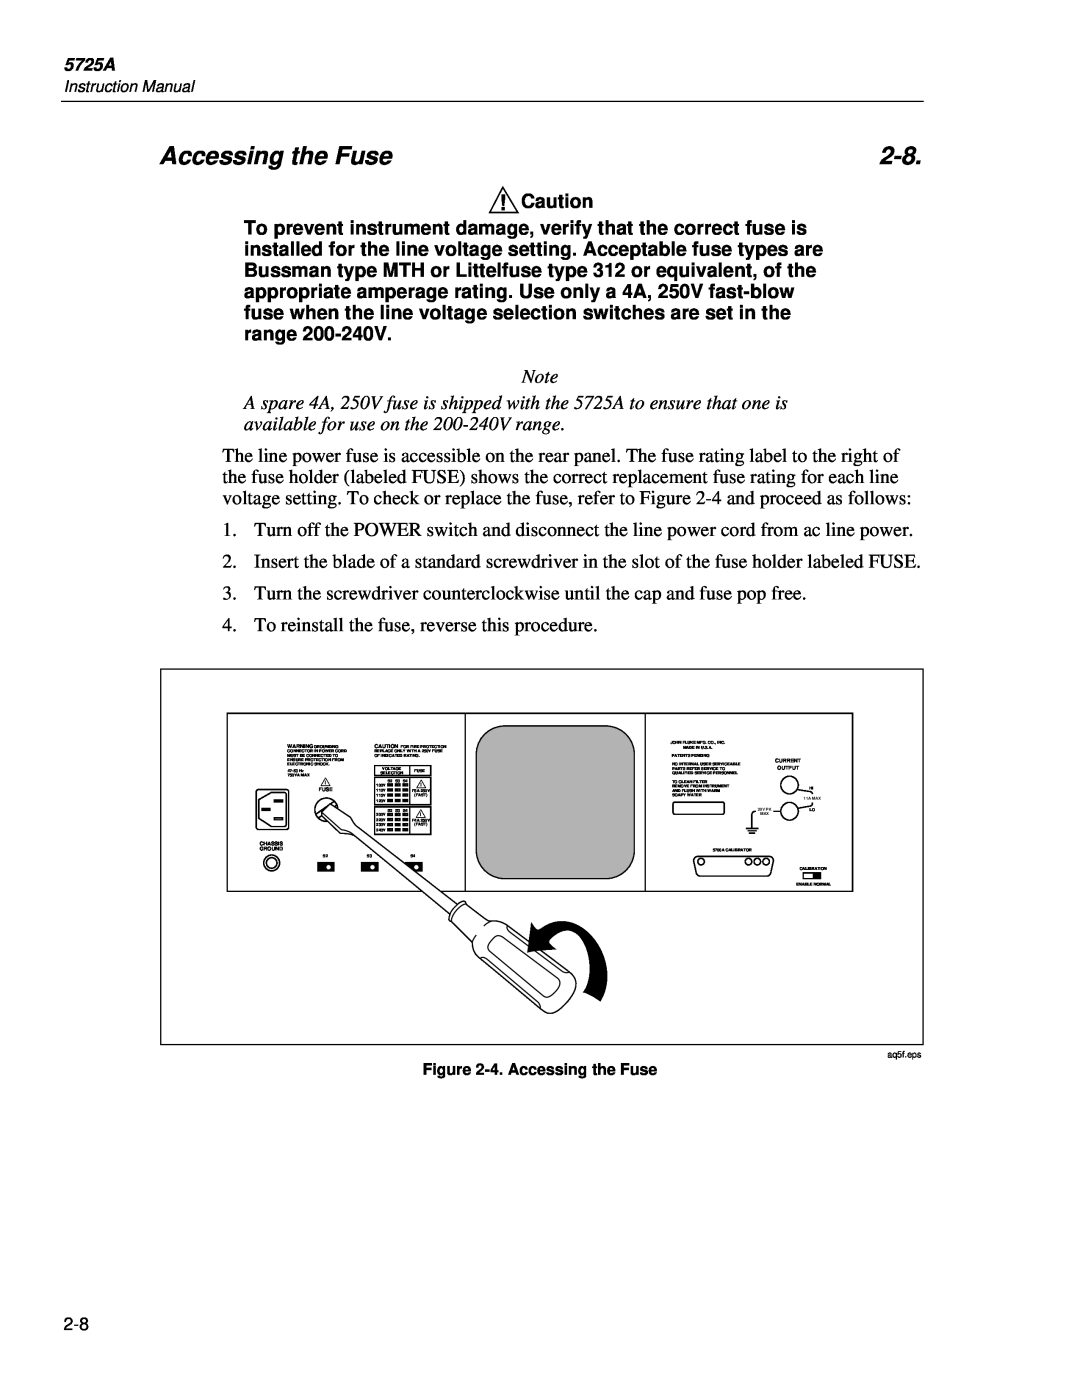 Fluke 5725A instruction manual Accessing the Fuse, wCaution 